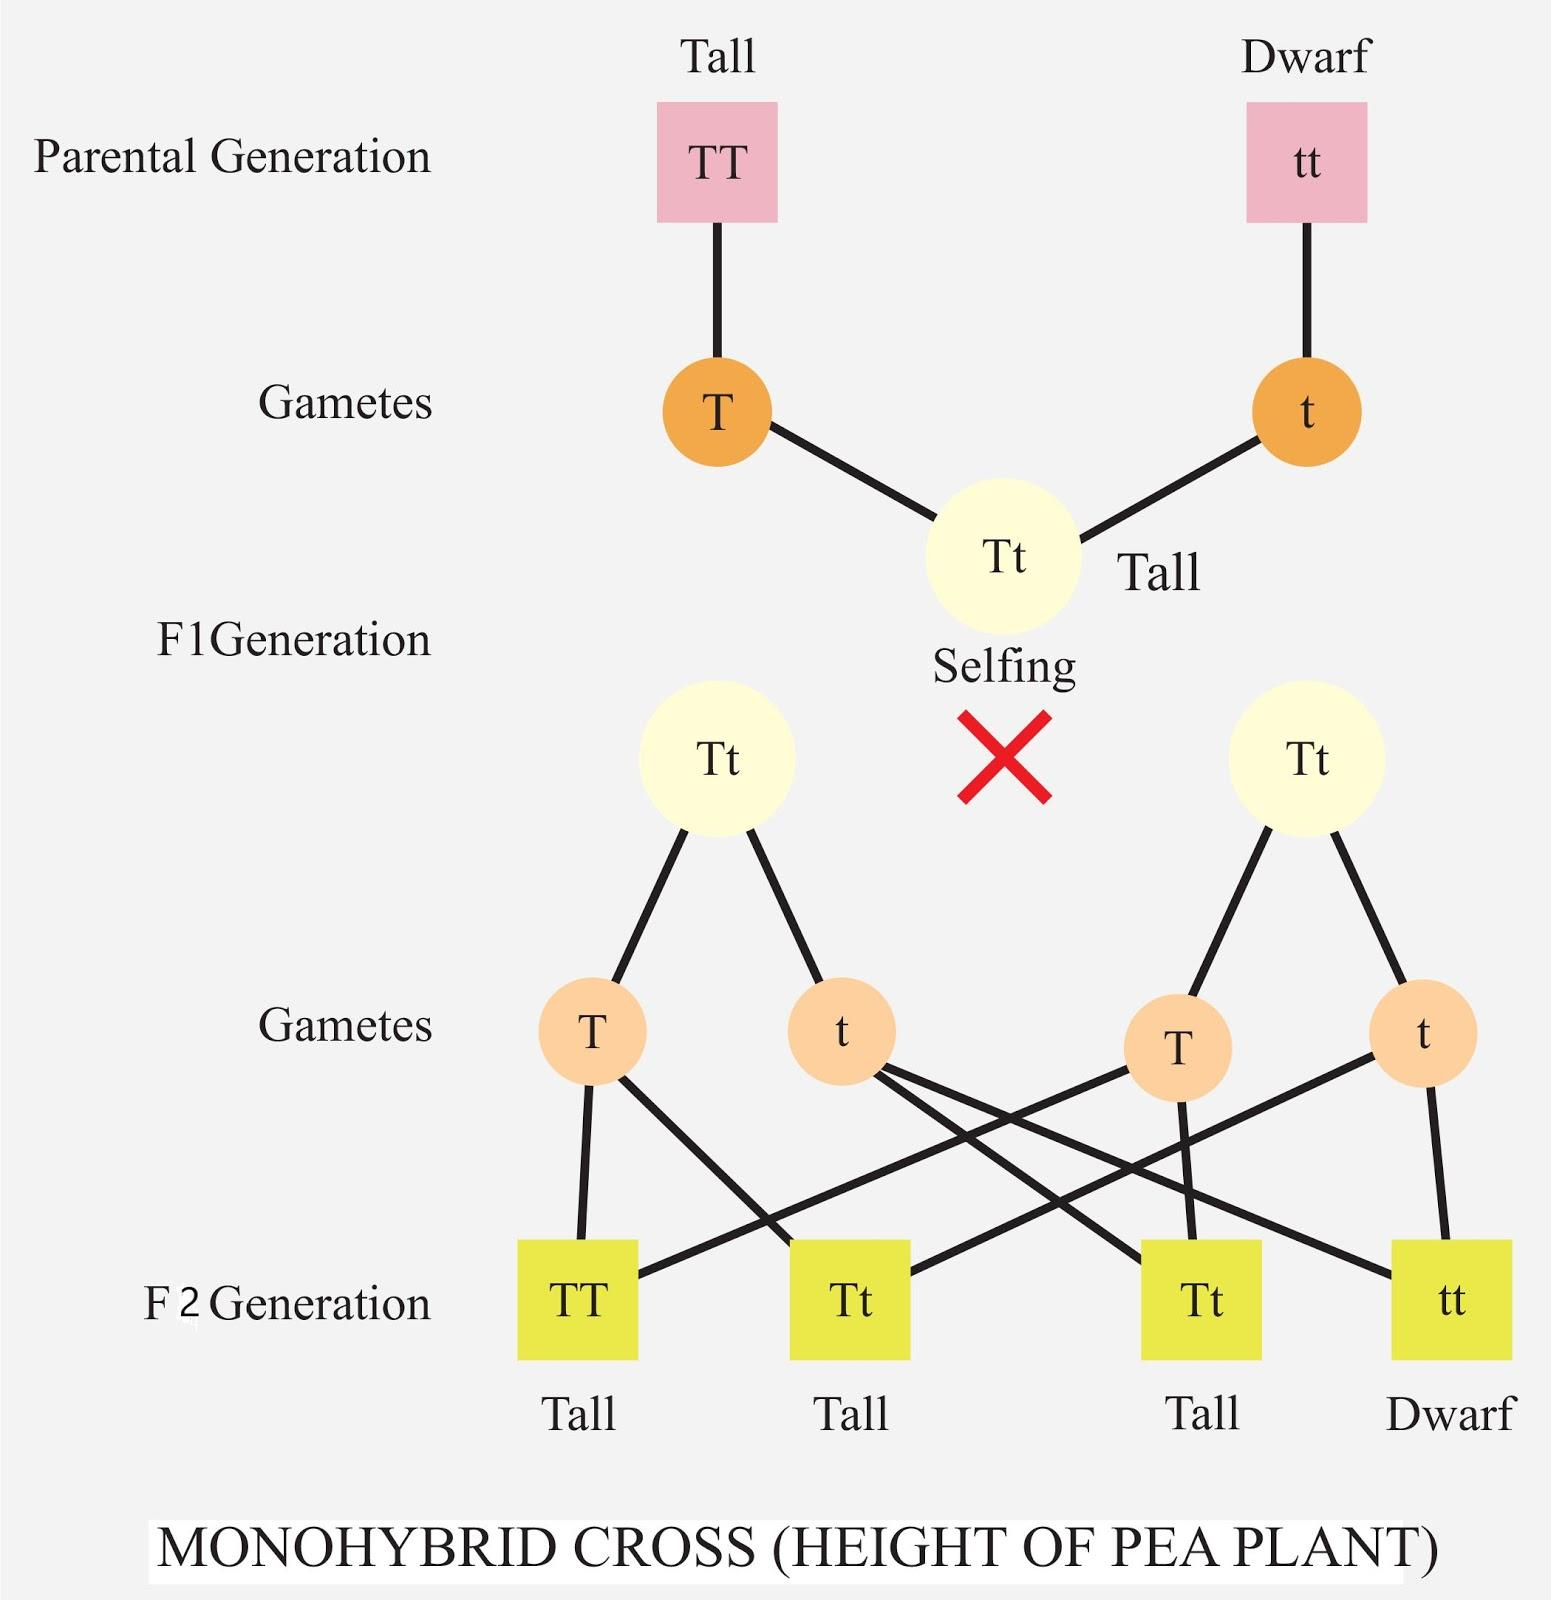 what-is-the-phenotypic-ratio-of-a-monohybrid-cross-a-1-3-b-3-1-c-1-2-2-1-d-9-3-3-1